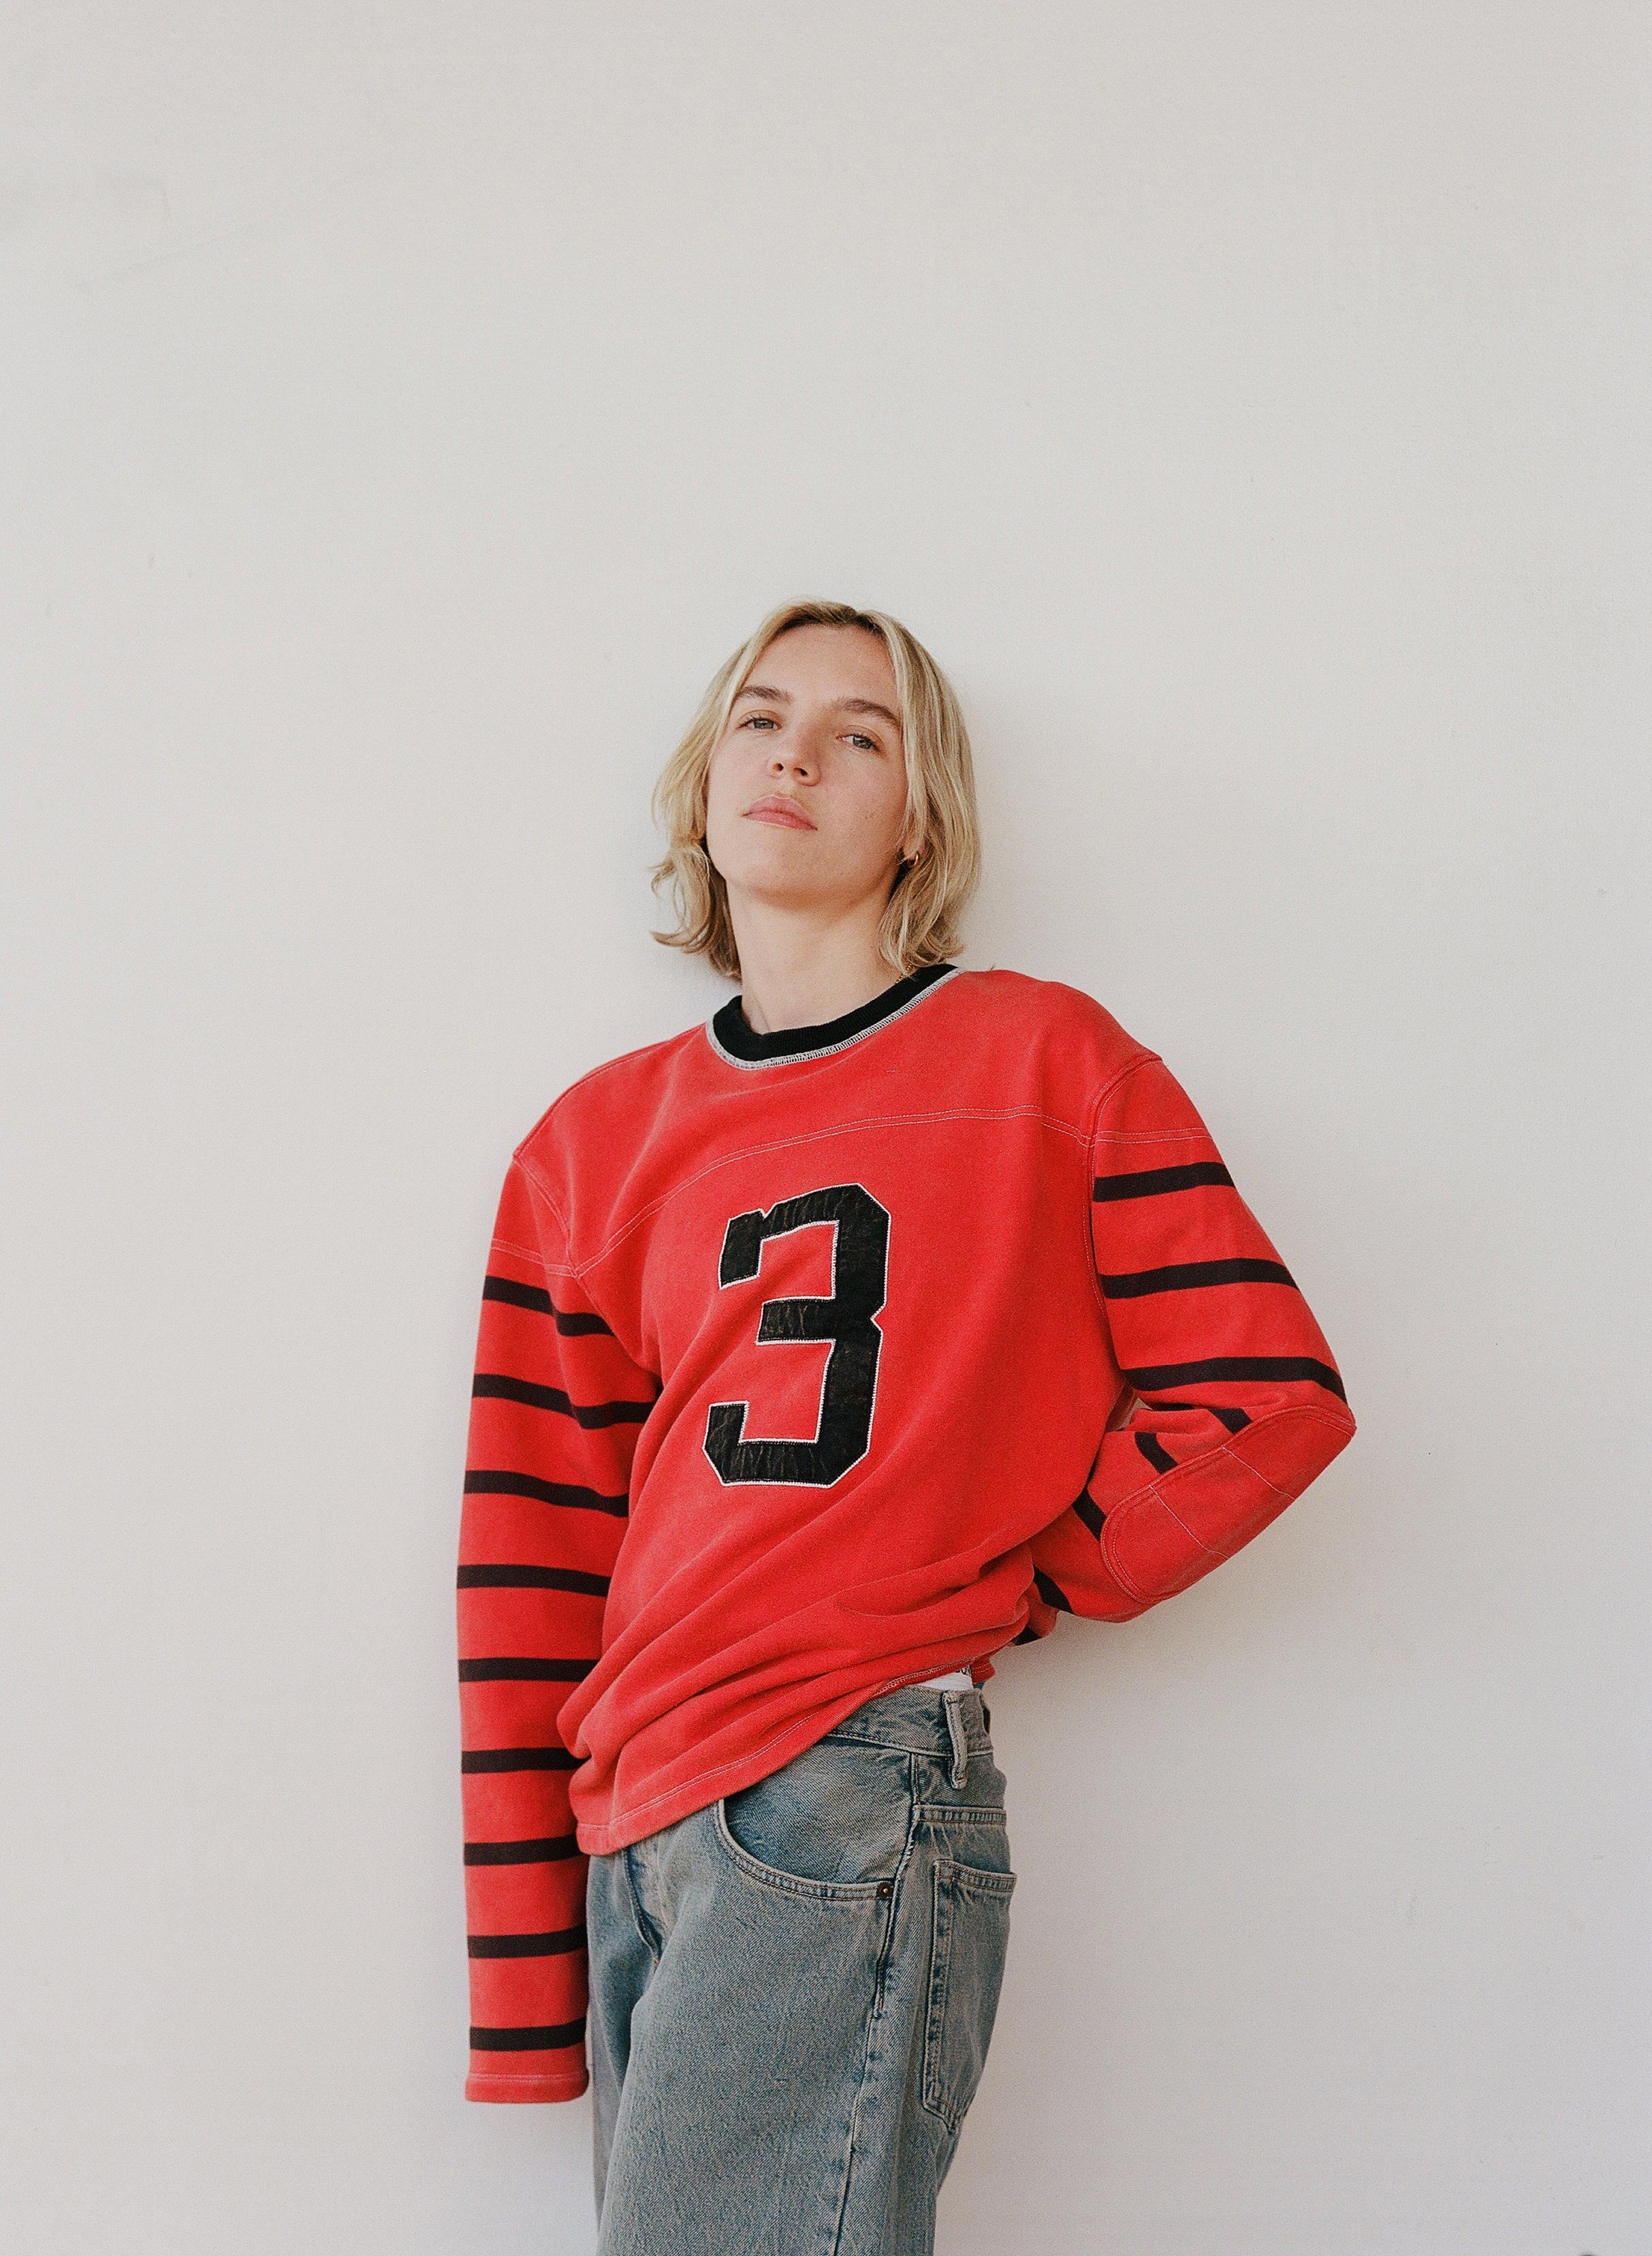 The Japanese House in New York promo photo for Spotify Fans First presale offer code